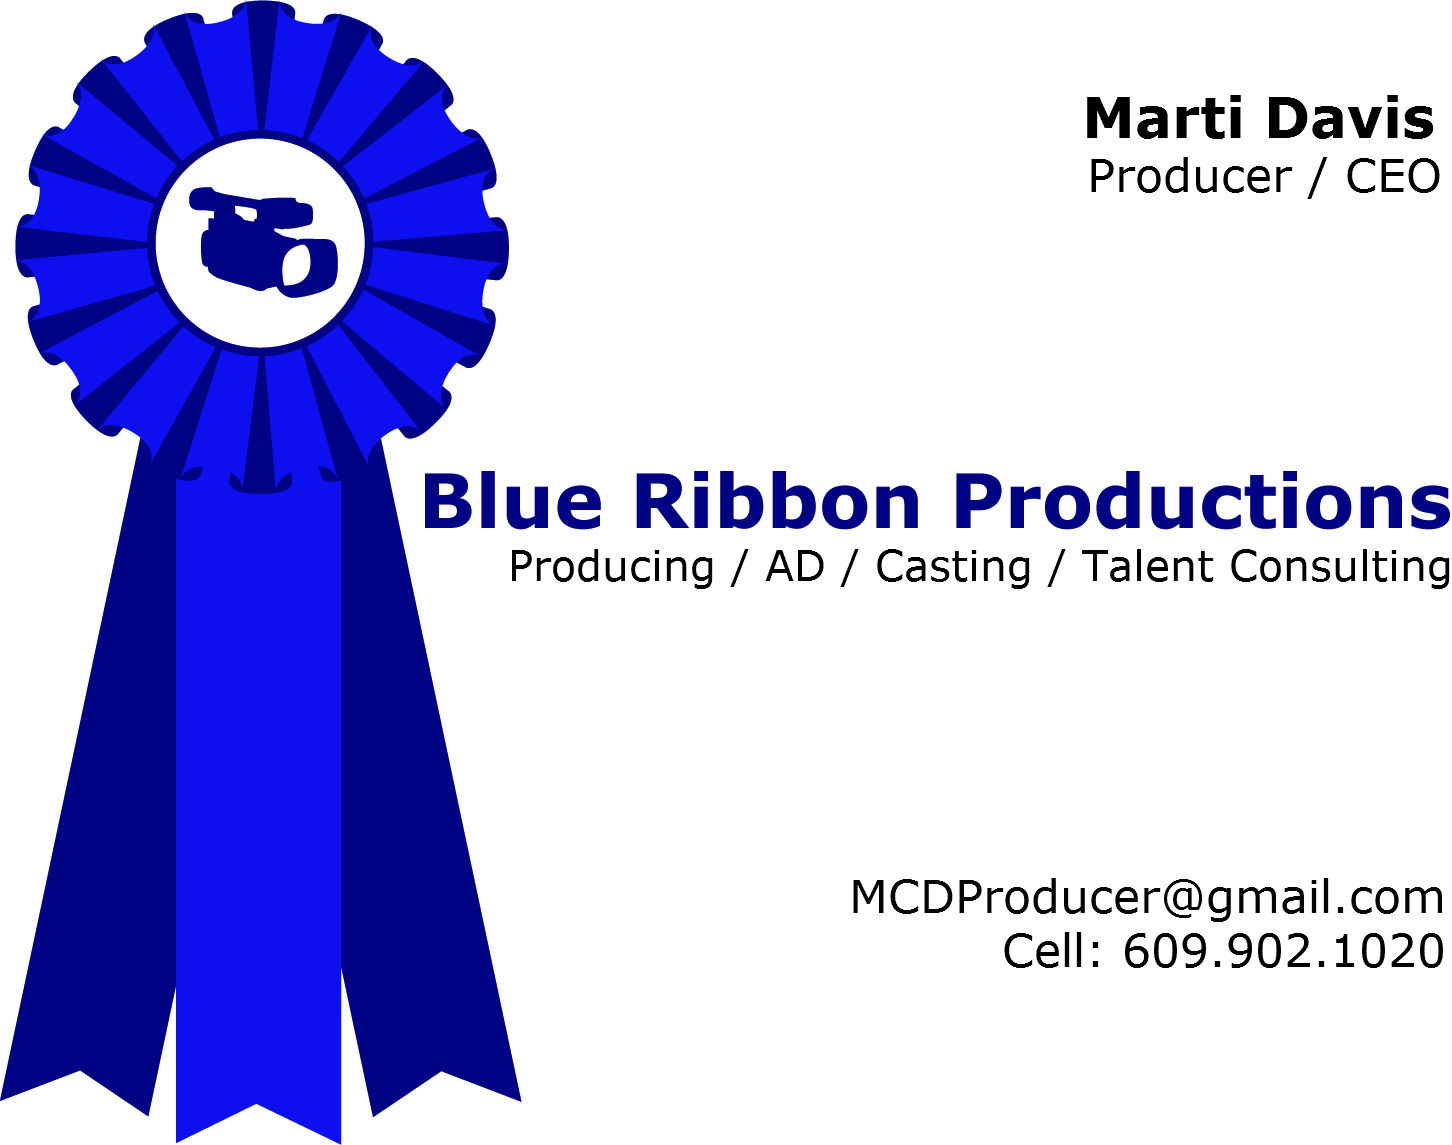 Blue Ribbon Productions MCDProducer@gmail.com Cell: 609.902.1020.